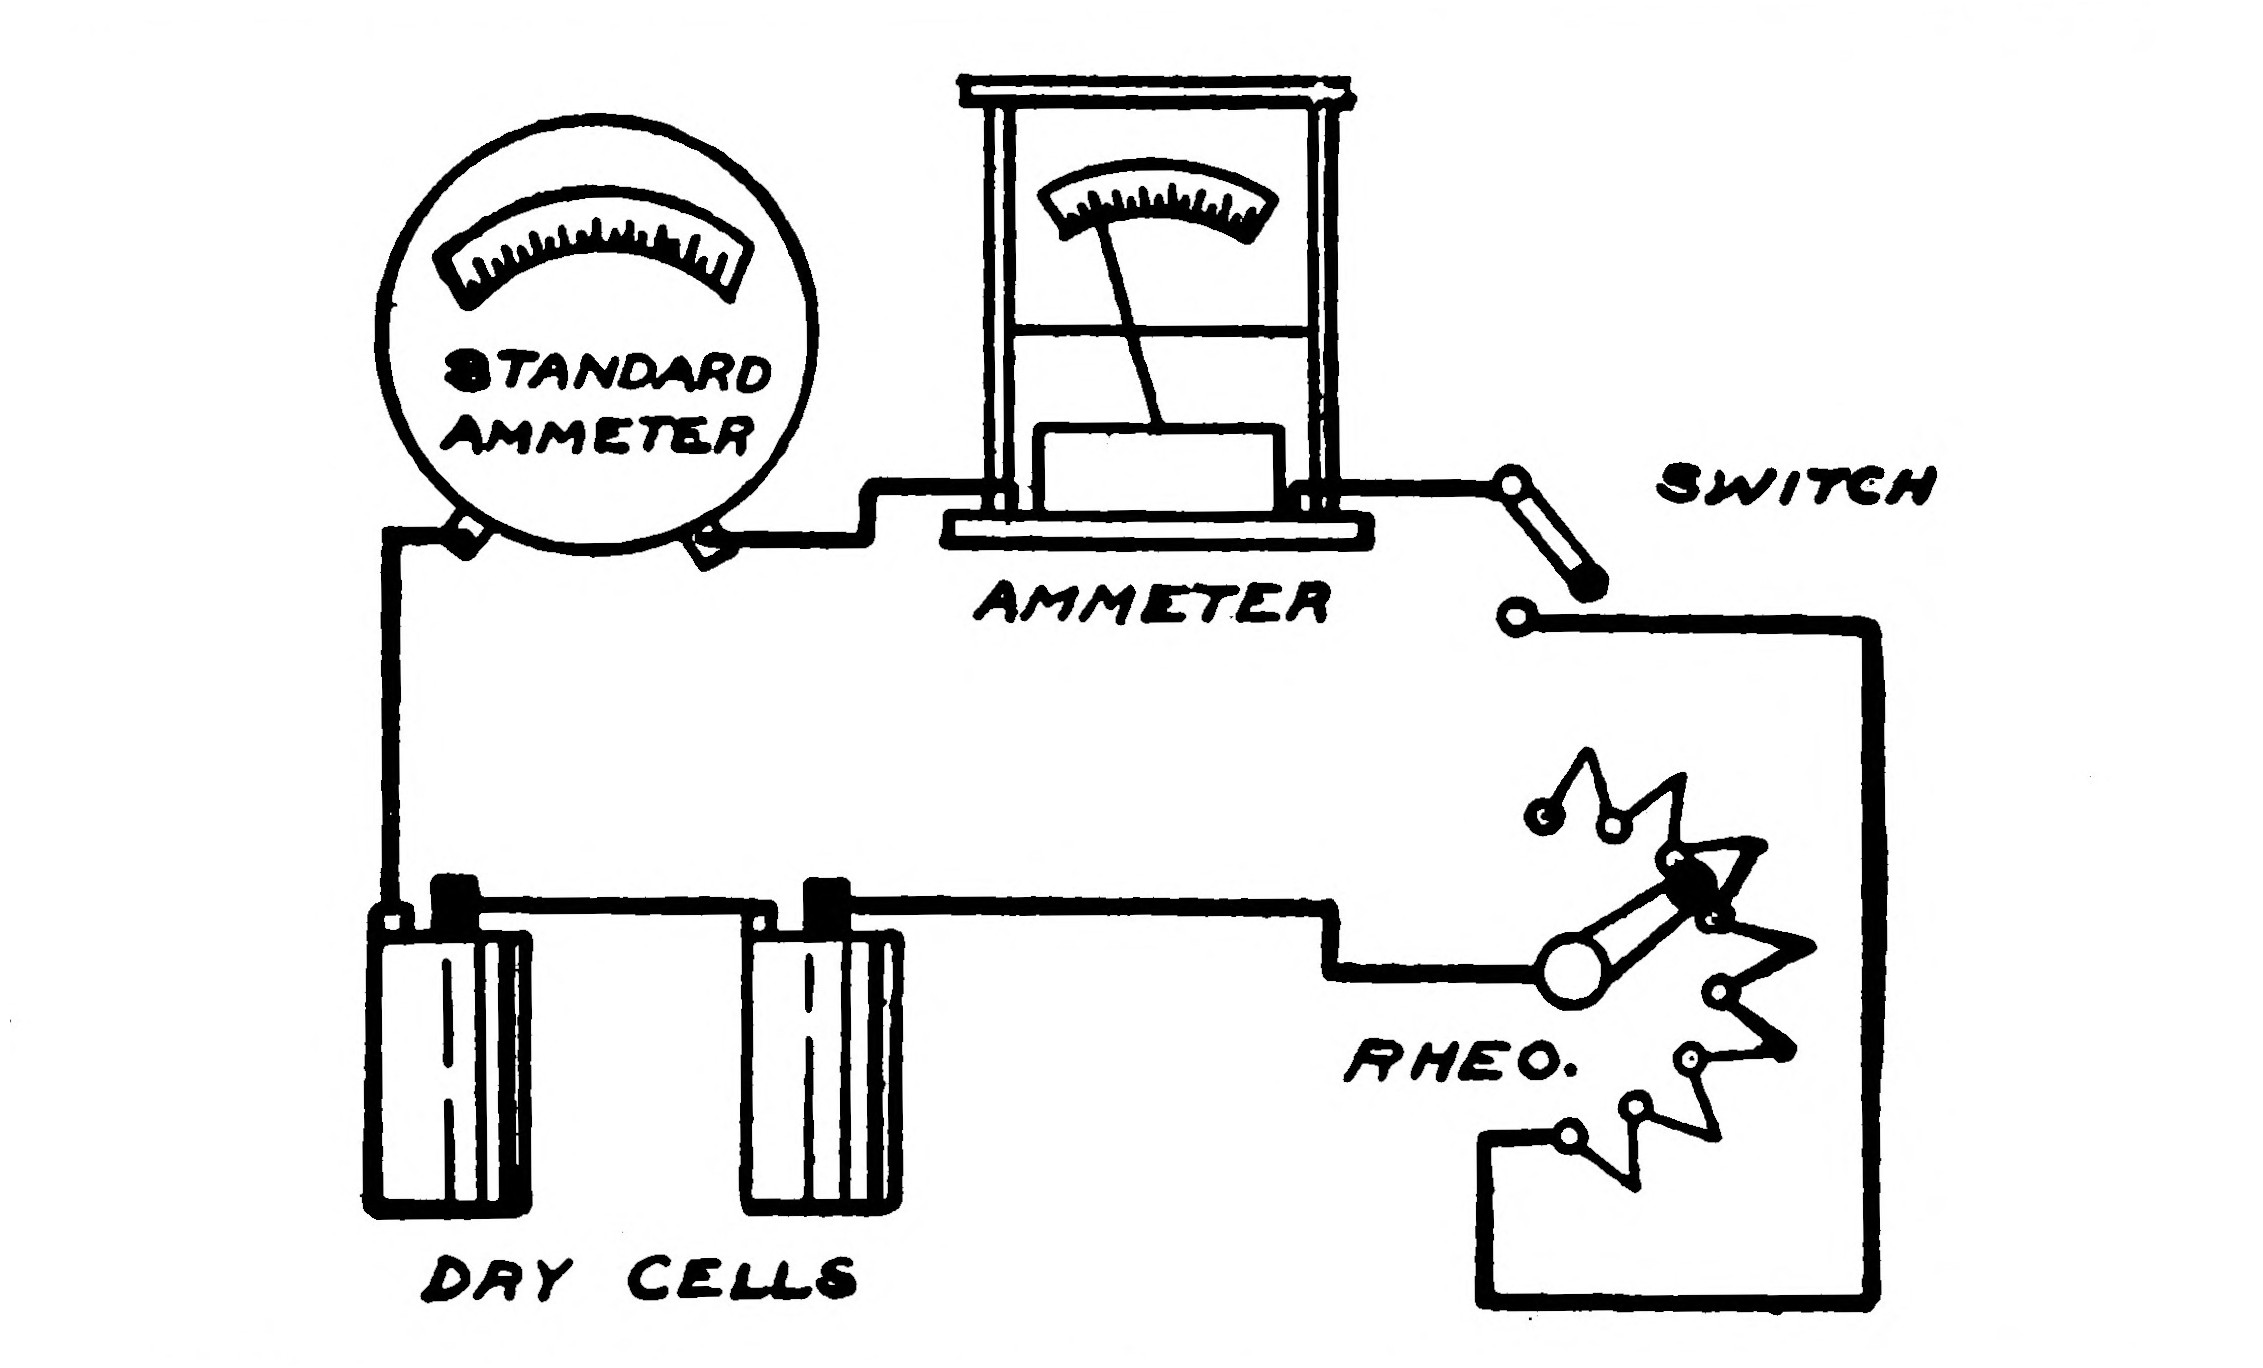 FIG. 74.—Showing how the Apparatus is arranged and connected for calibrating the Ammeter.